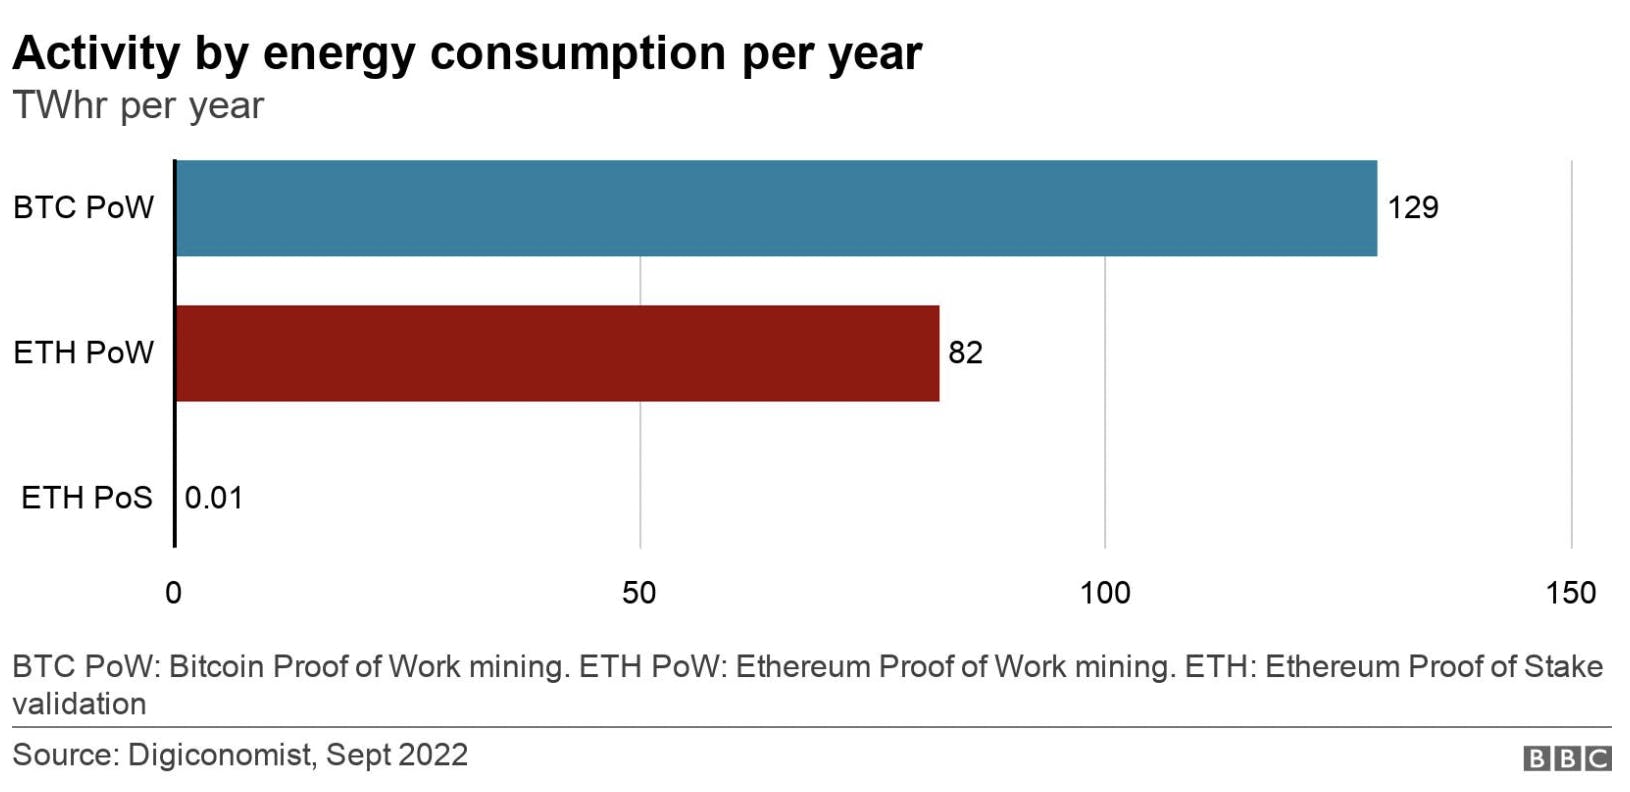 A chart showing how much energy is being consumed by BTC PoW, ETH PoW and ETH PoS